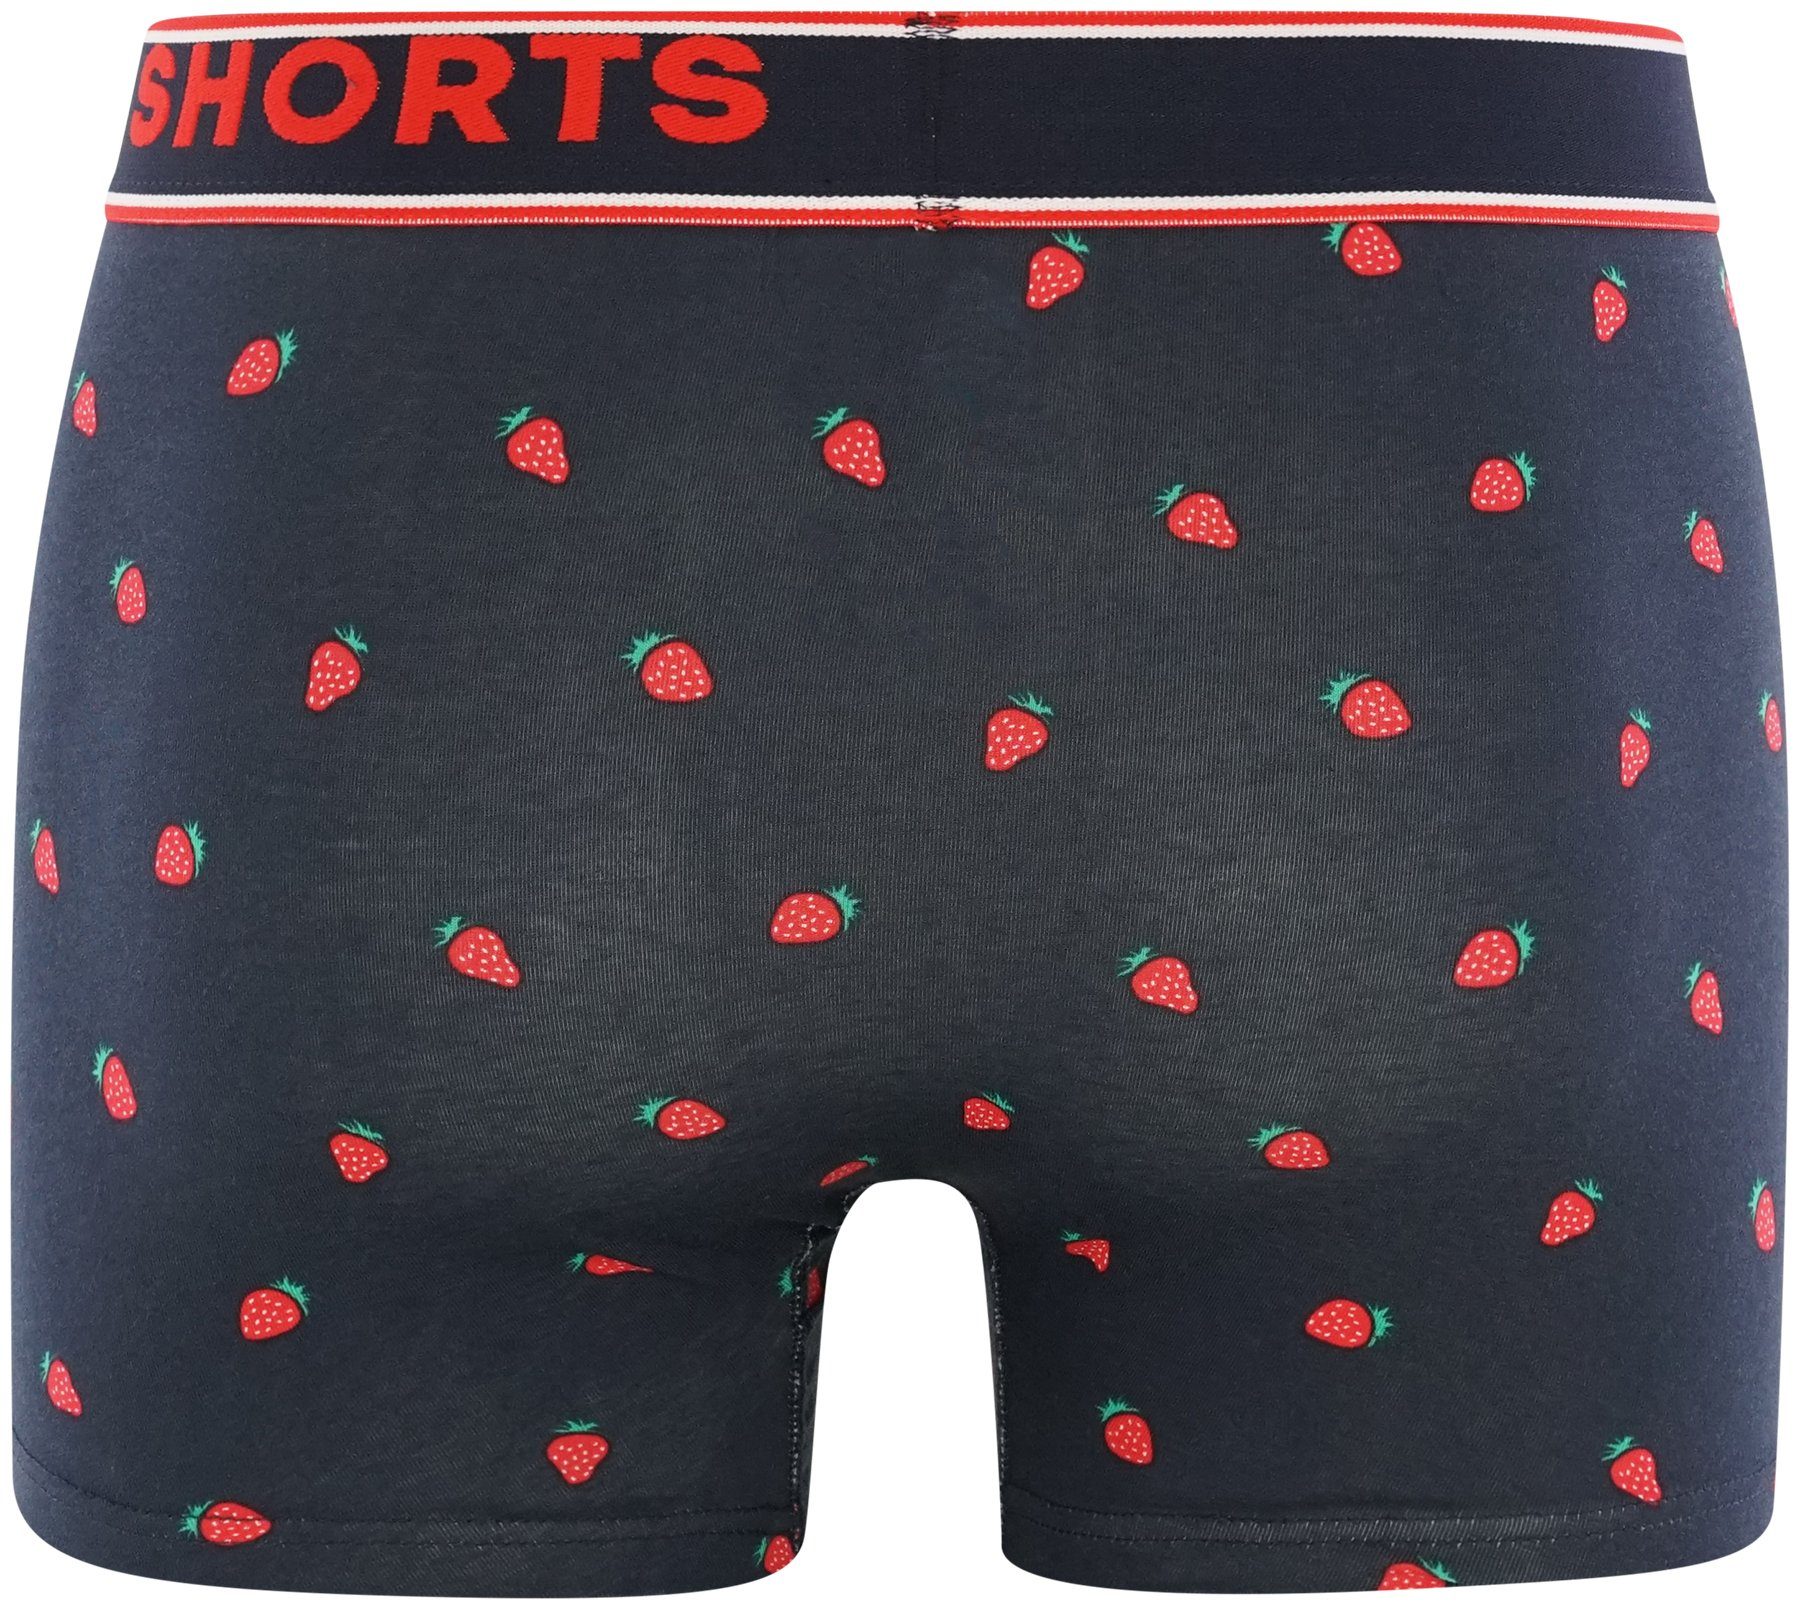 HAPPY SHORTS Retro Pants (2-St) Trunks Stripe 2-Pack Strawberries and